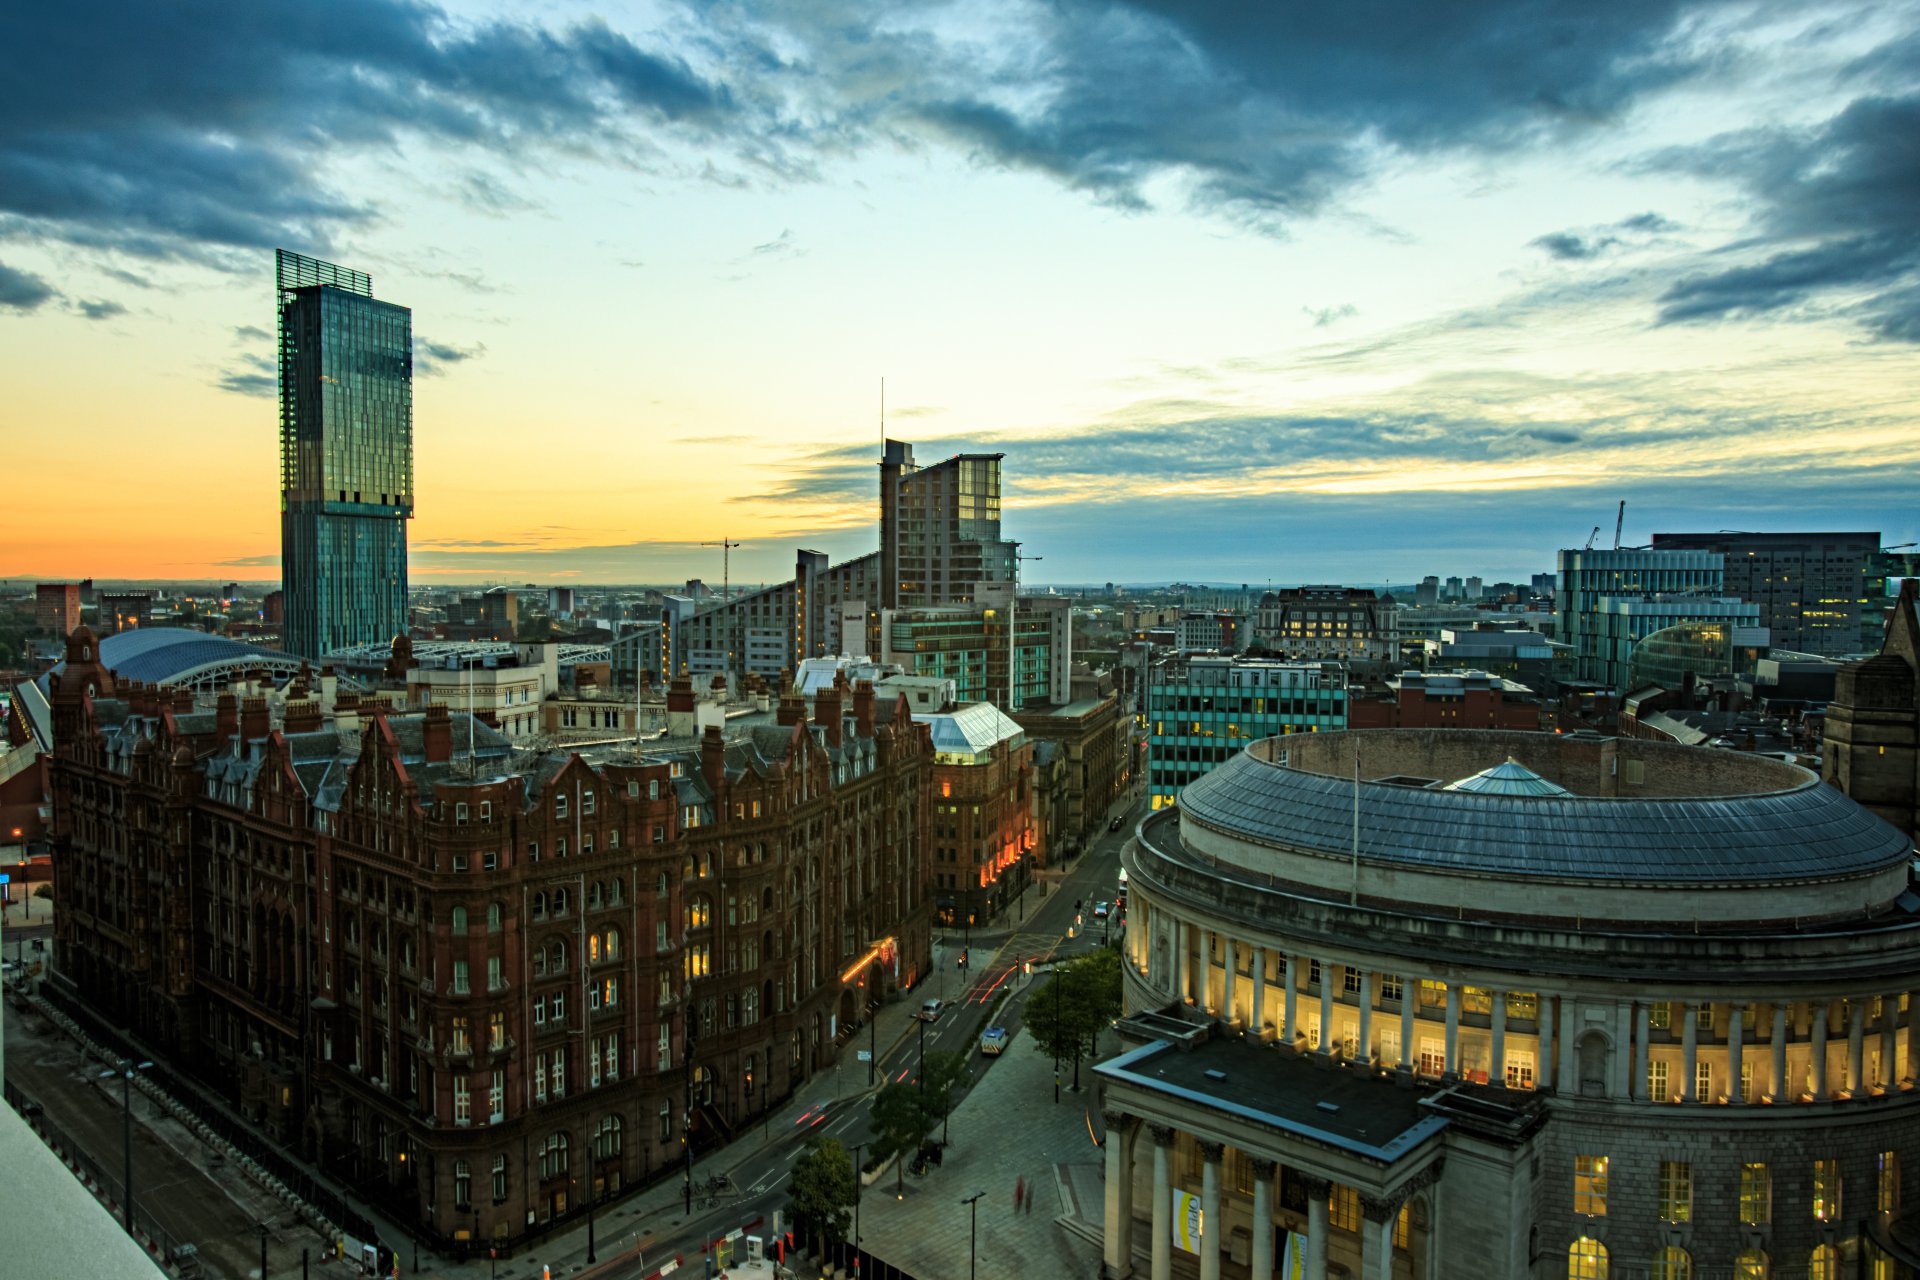 Wide angle image of Manchester at dusk